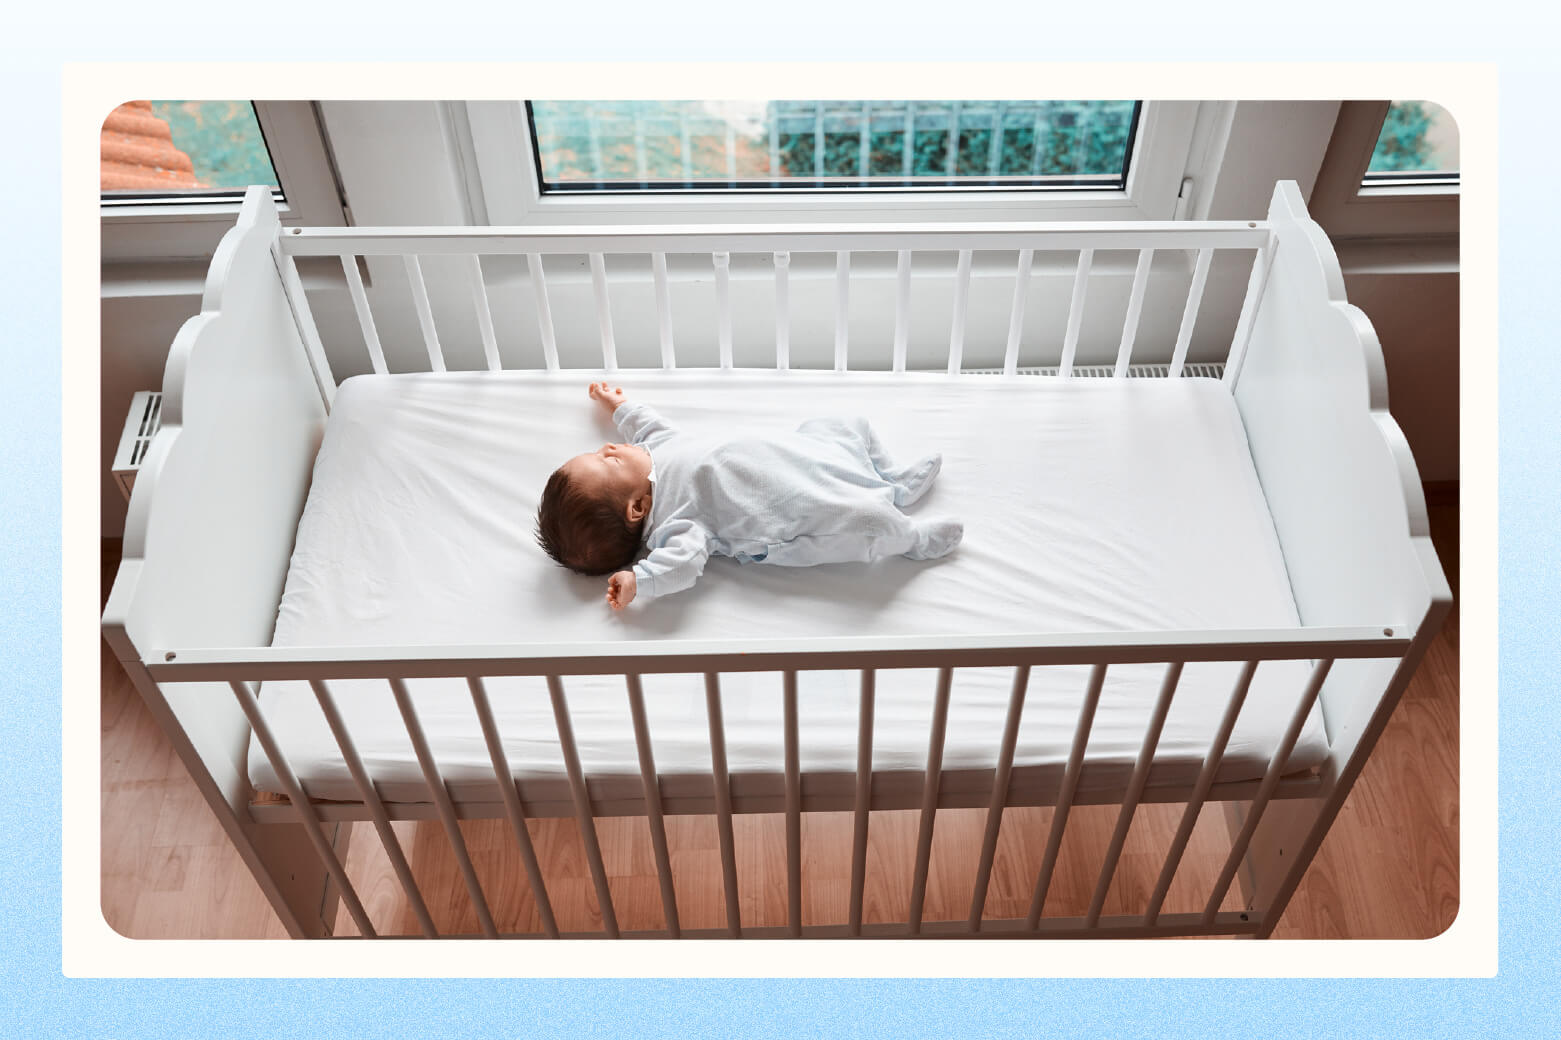 Overhead view of baby lying in a plain white standard crib